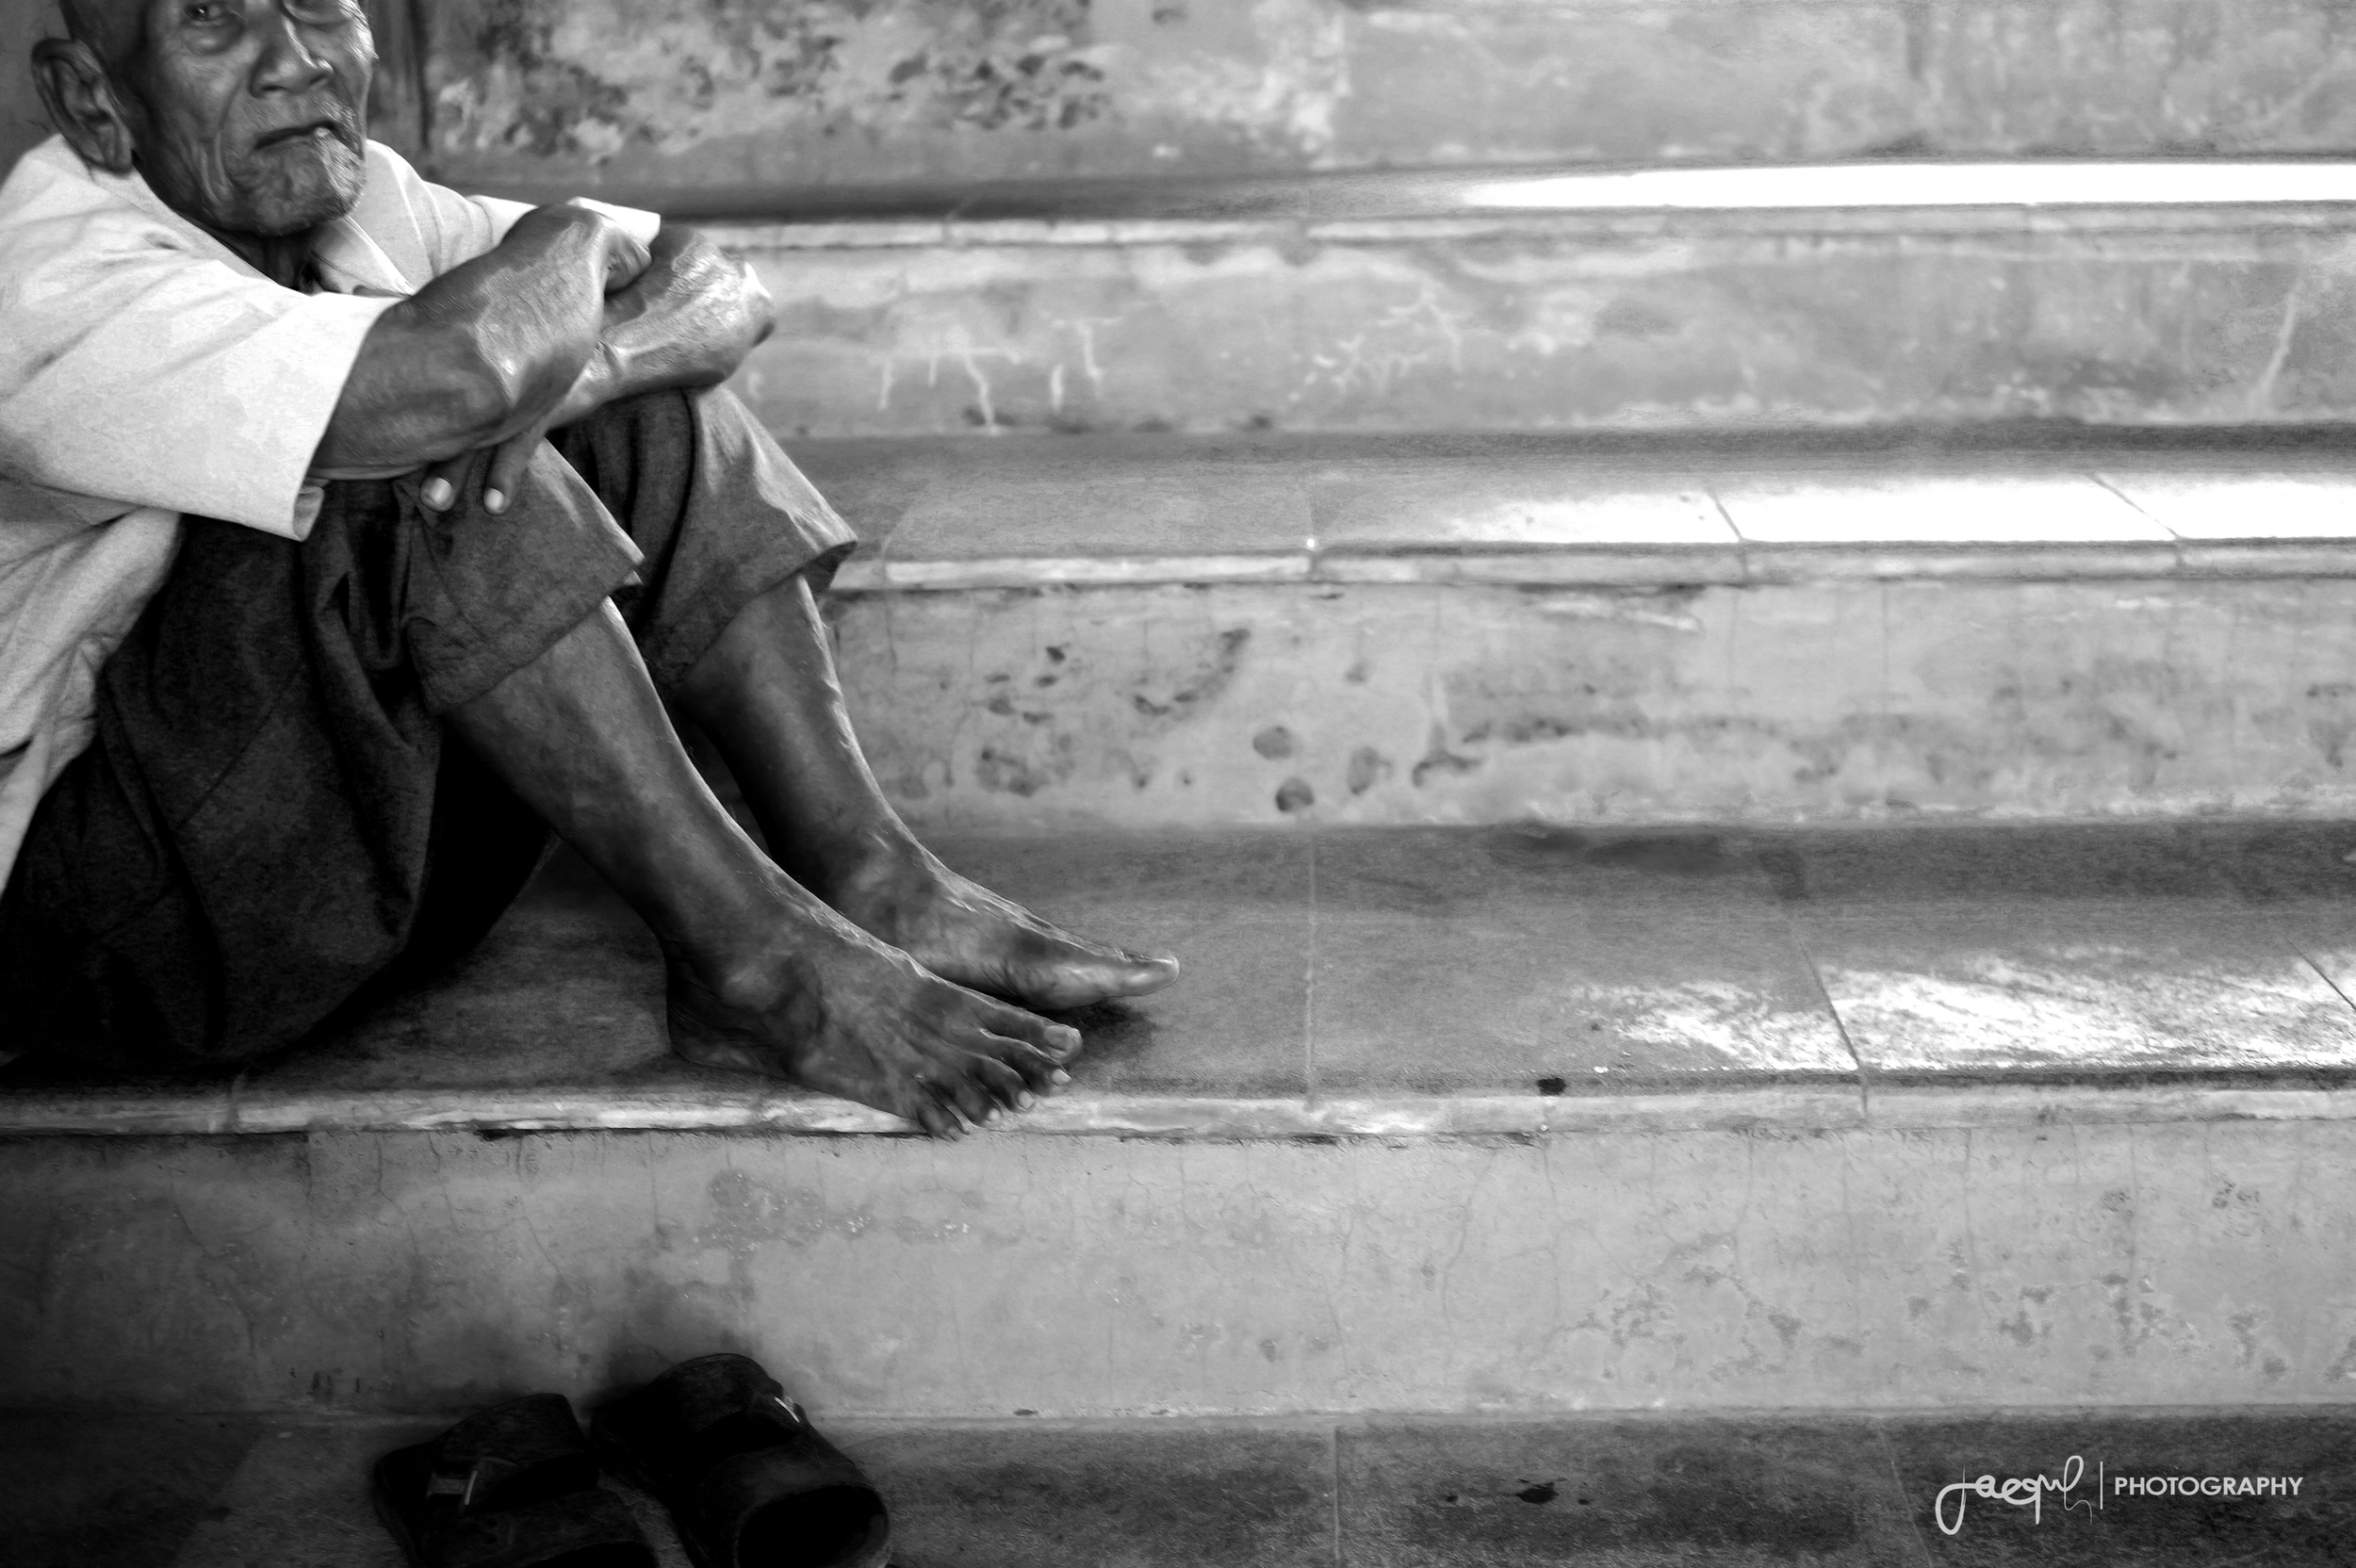  In 2013 I got the opportunity to travel to Indonesia. This photograph was taken at the Sultan's Bath in Jogjakarta. This beautiful man was sitting on it's steps simply watching all us tourists walk by.&nbsp; 